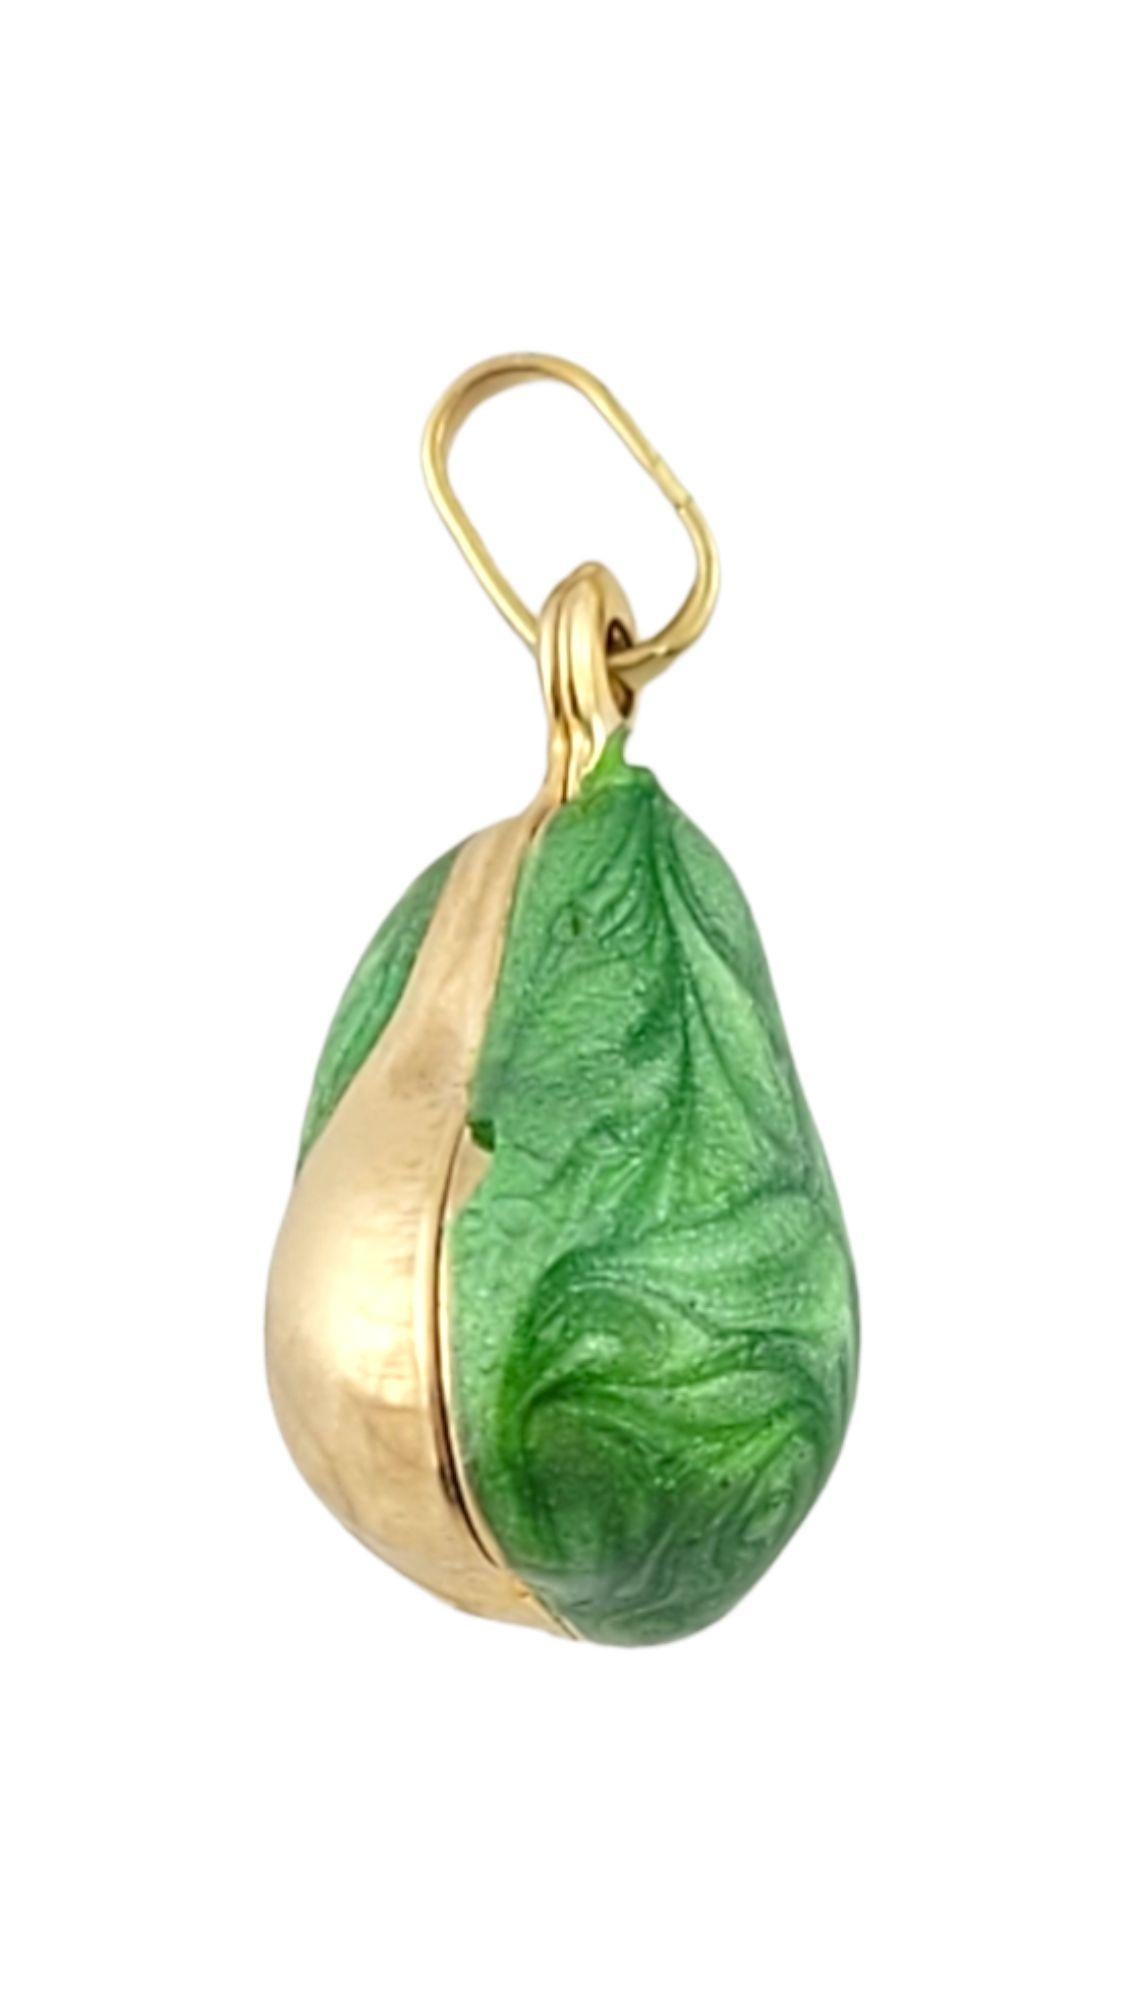 Women's 18K Yellow Gold Pear Charm with Green Enamel #14535 For Sale